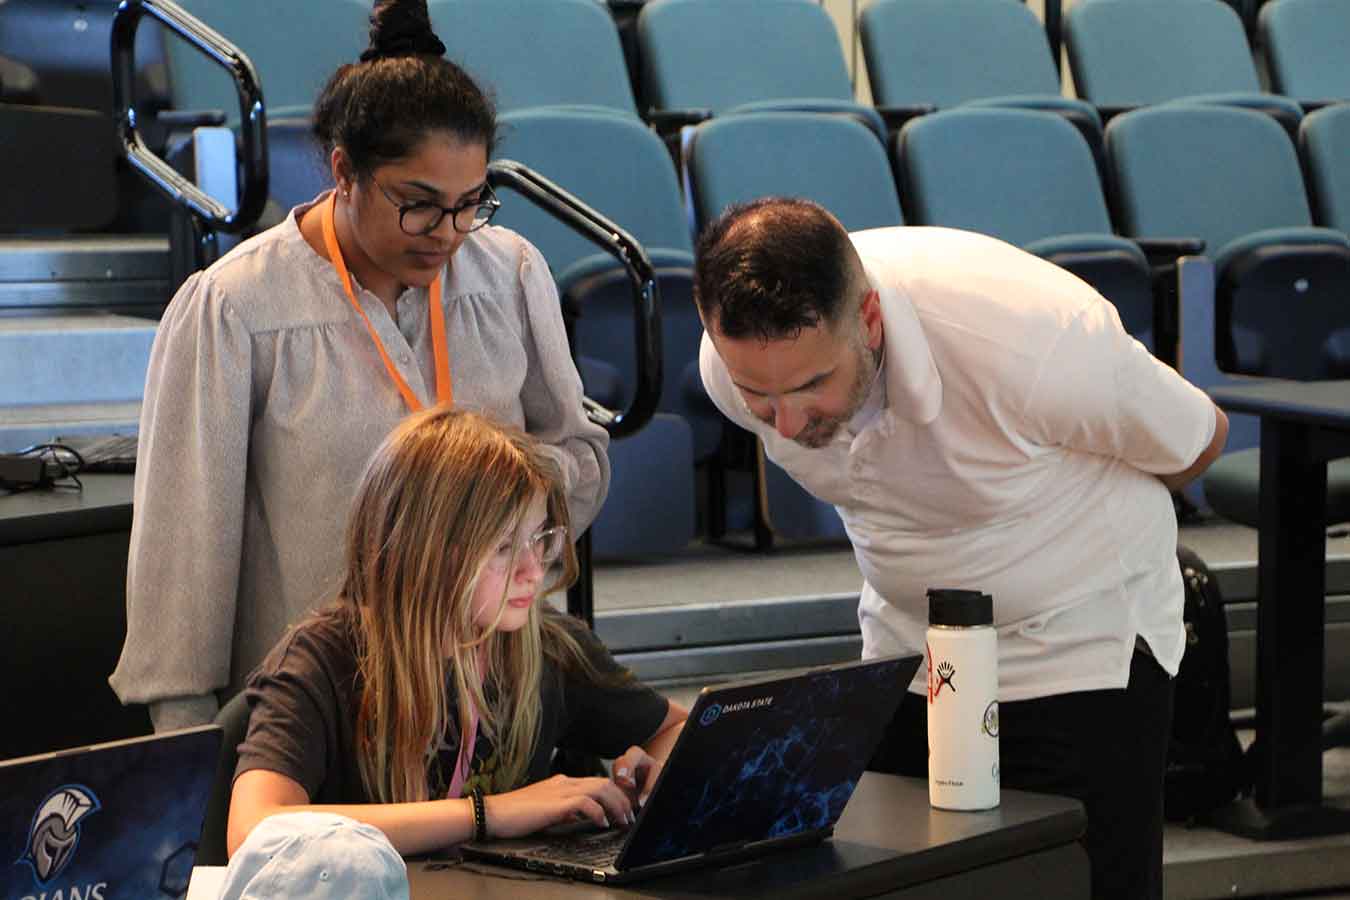 Justin Tolman (right), director of North American Training with AccessData, an Exterro company, answers a question for a young camper at the 2021 DSU GenCyber Camp, while camp director Kanthi Narukonda looks on. This camp session focuses on the importance of making wise decisions online.